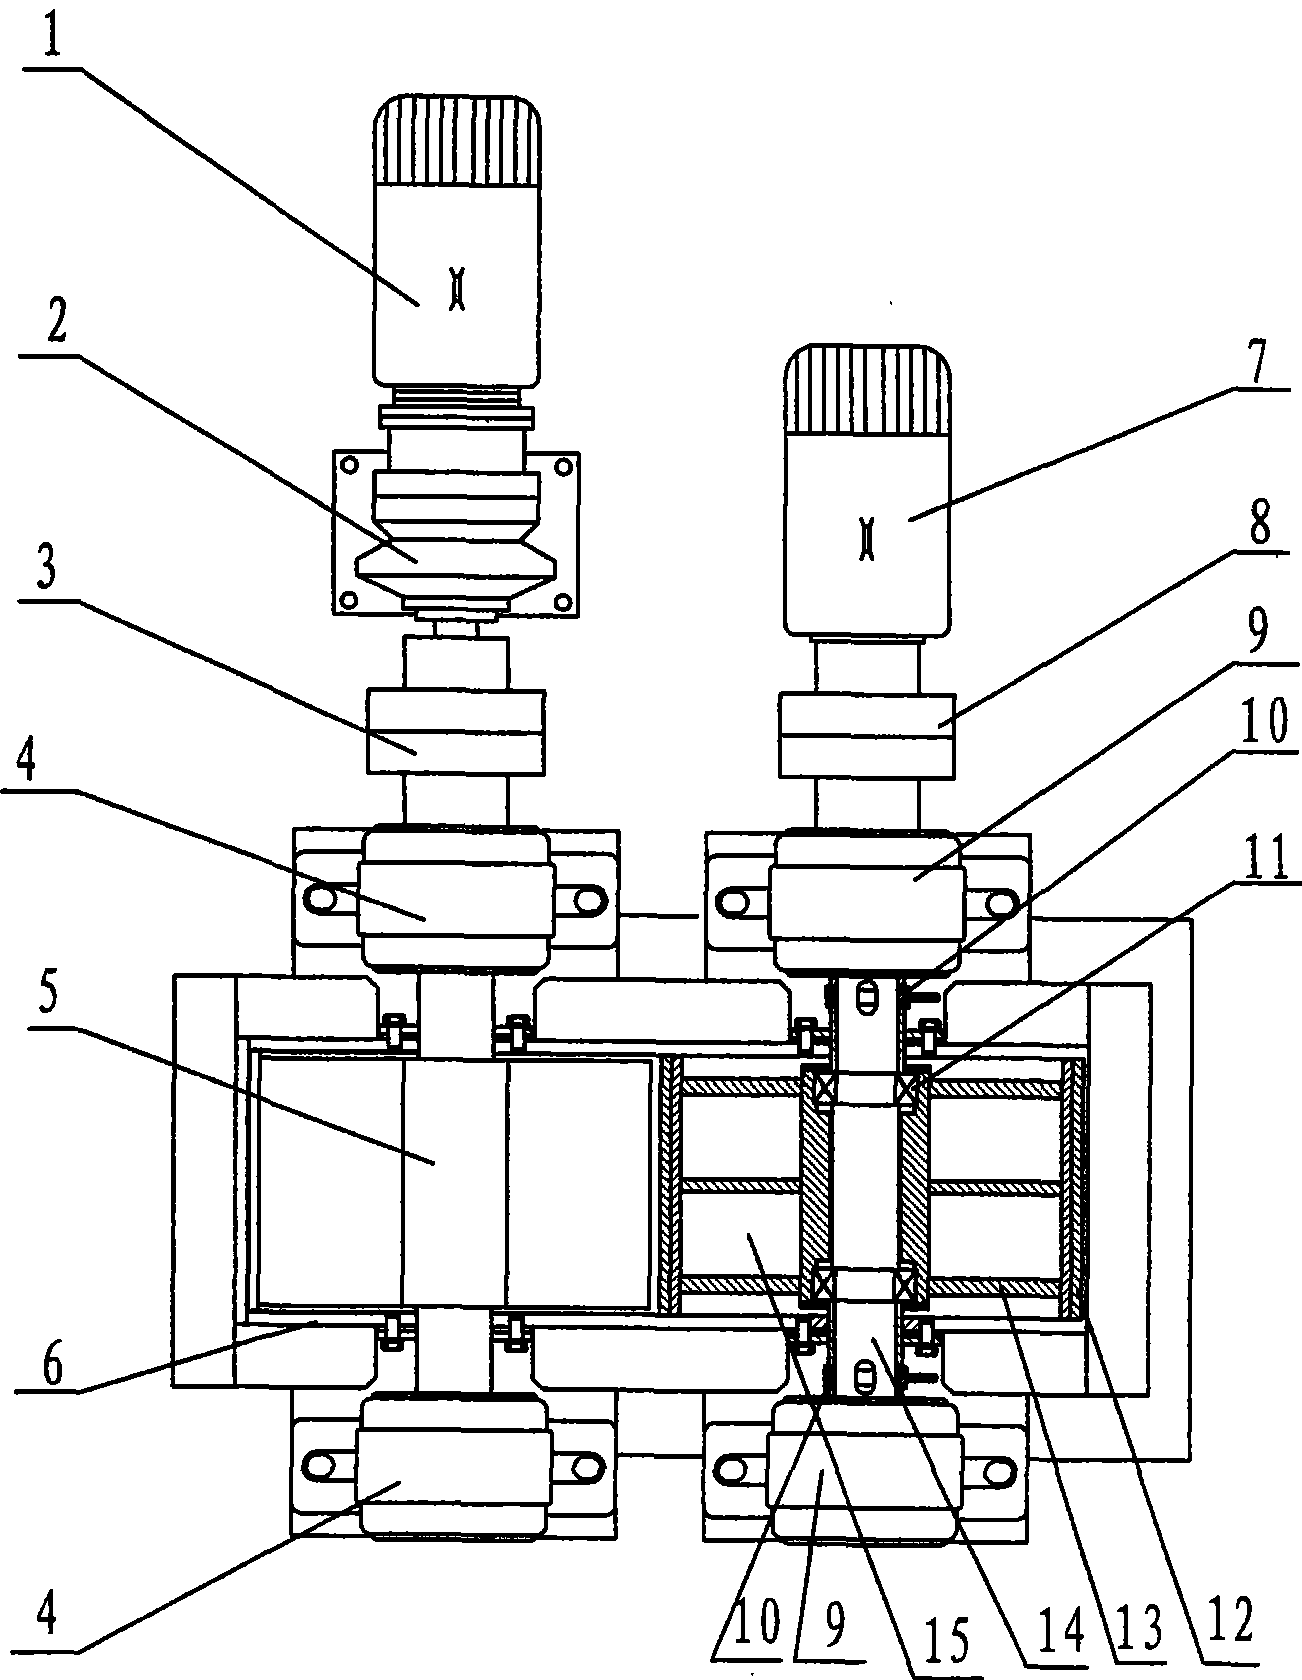 Double-roller impact crusher